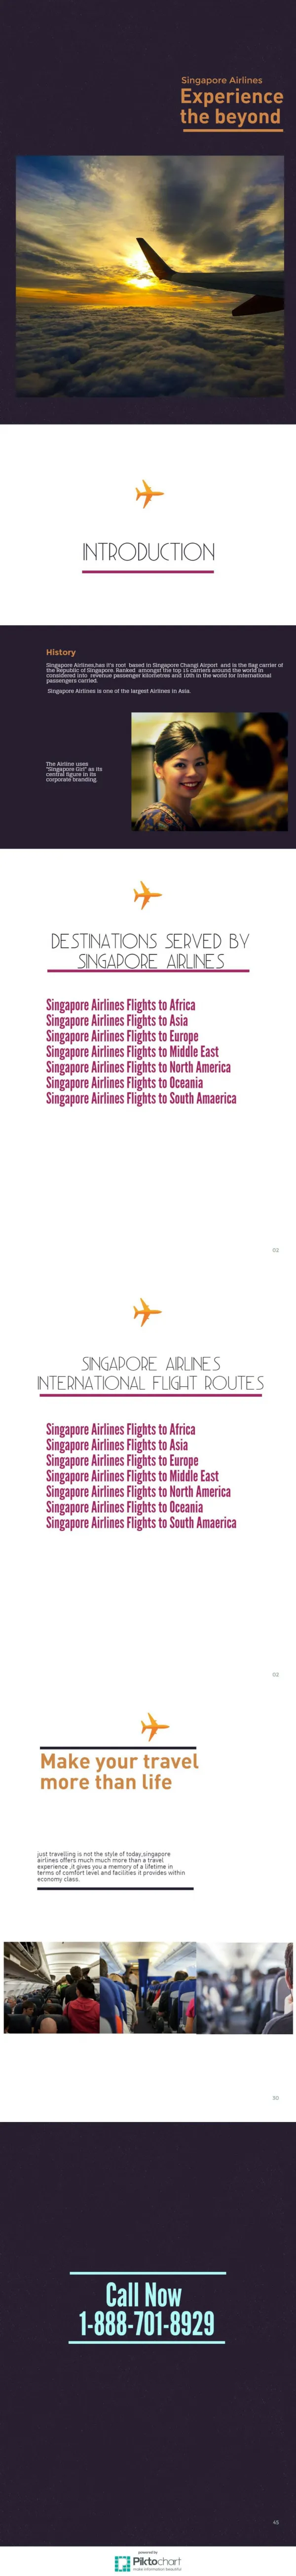 Singapore Airlines Booking Phone Number 1-888-701-8929